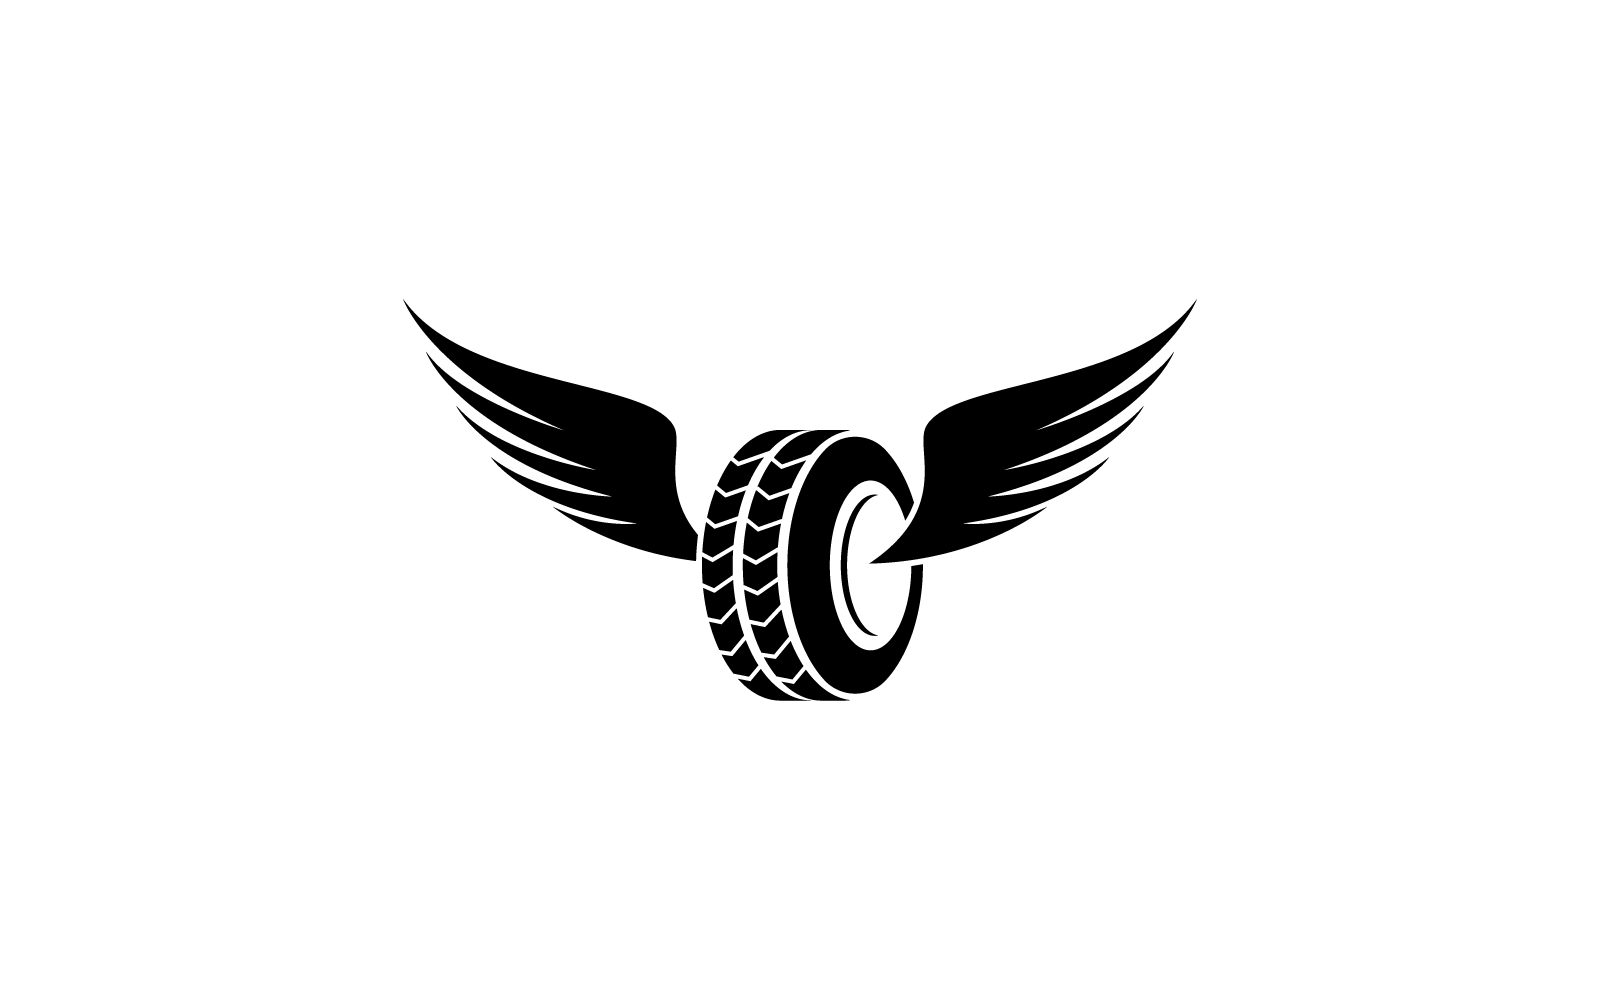 Tires and wing illustration logo vector template Logo Template